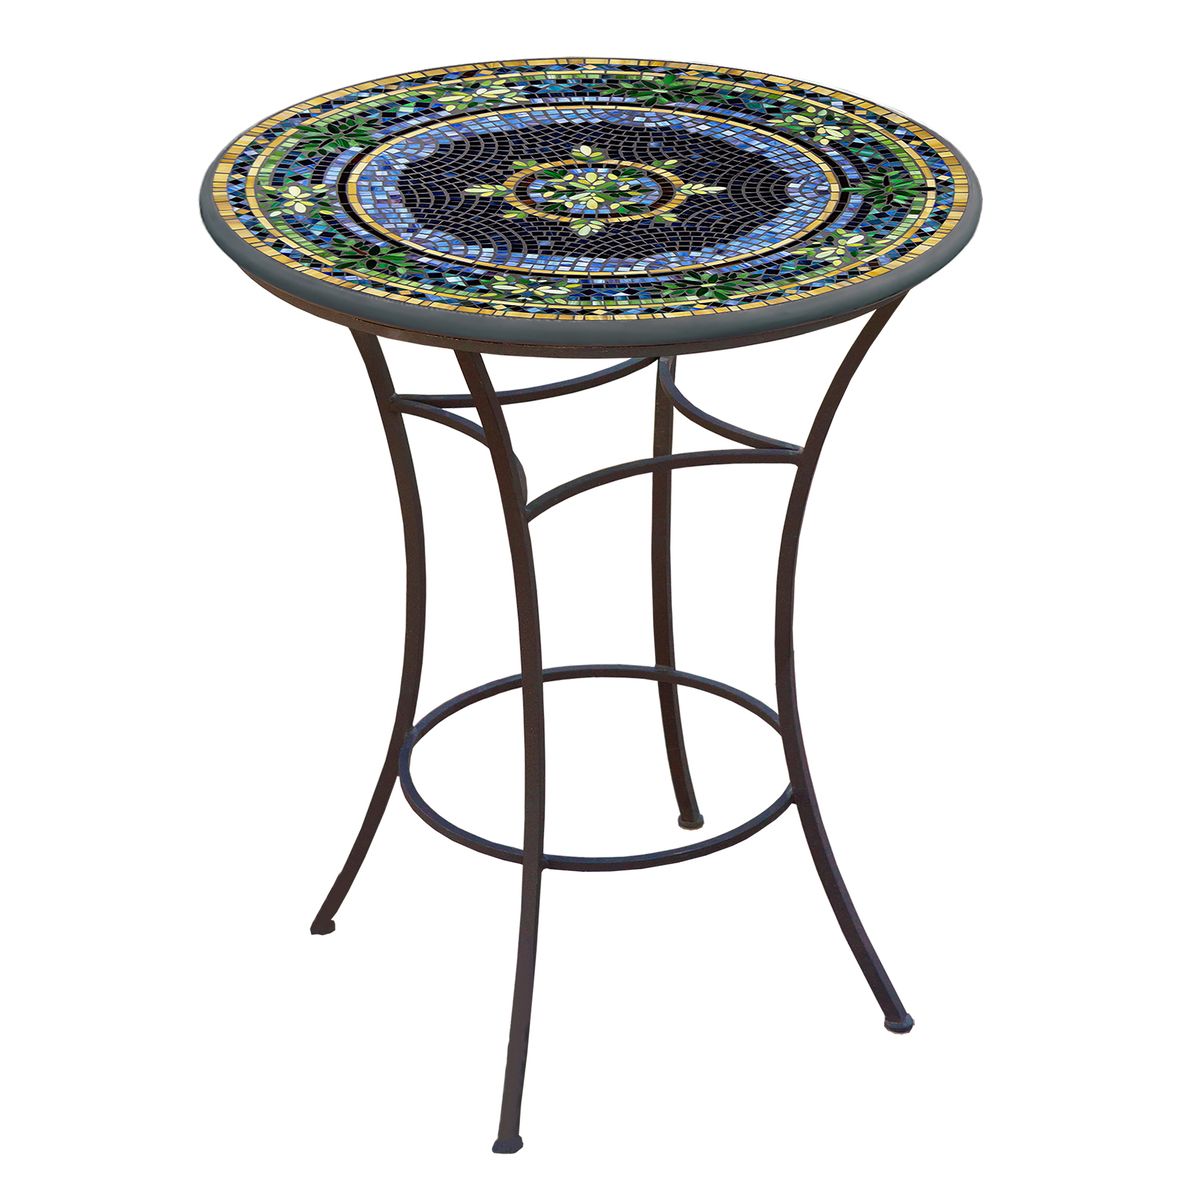 Lake Como Mosaic High Dining Table-Iron Accents